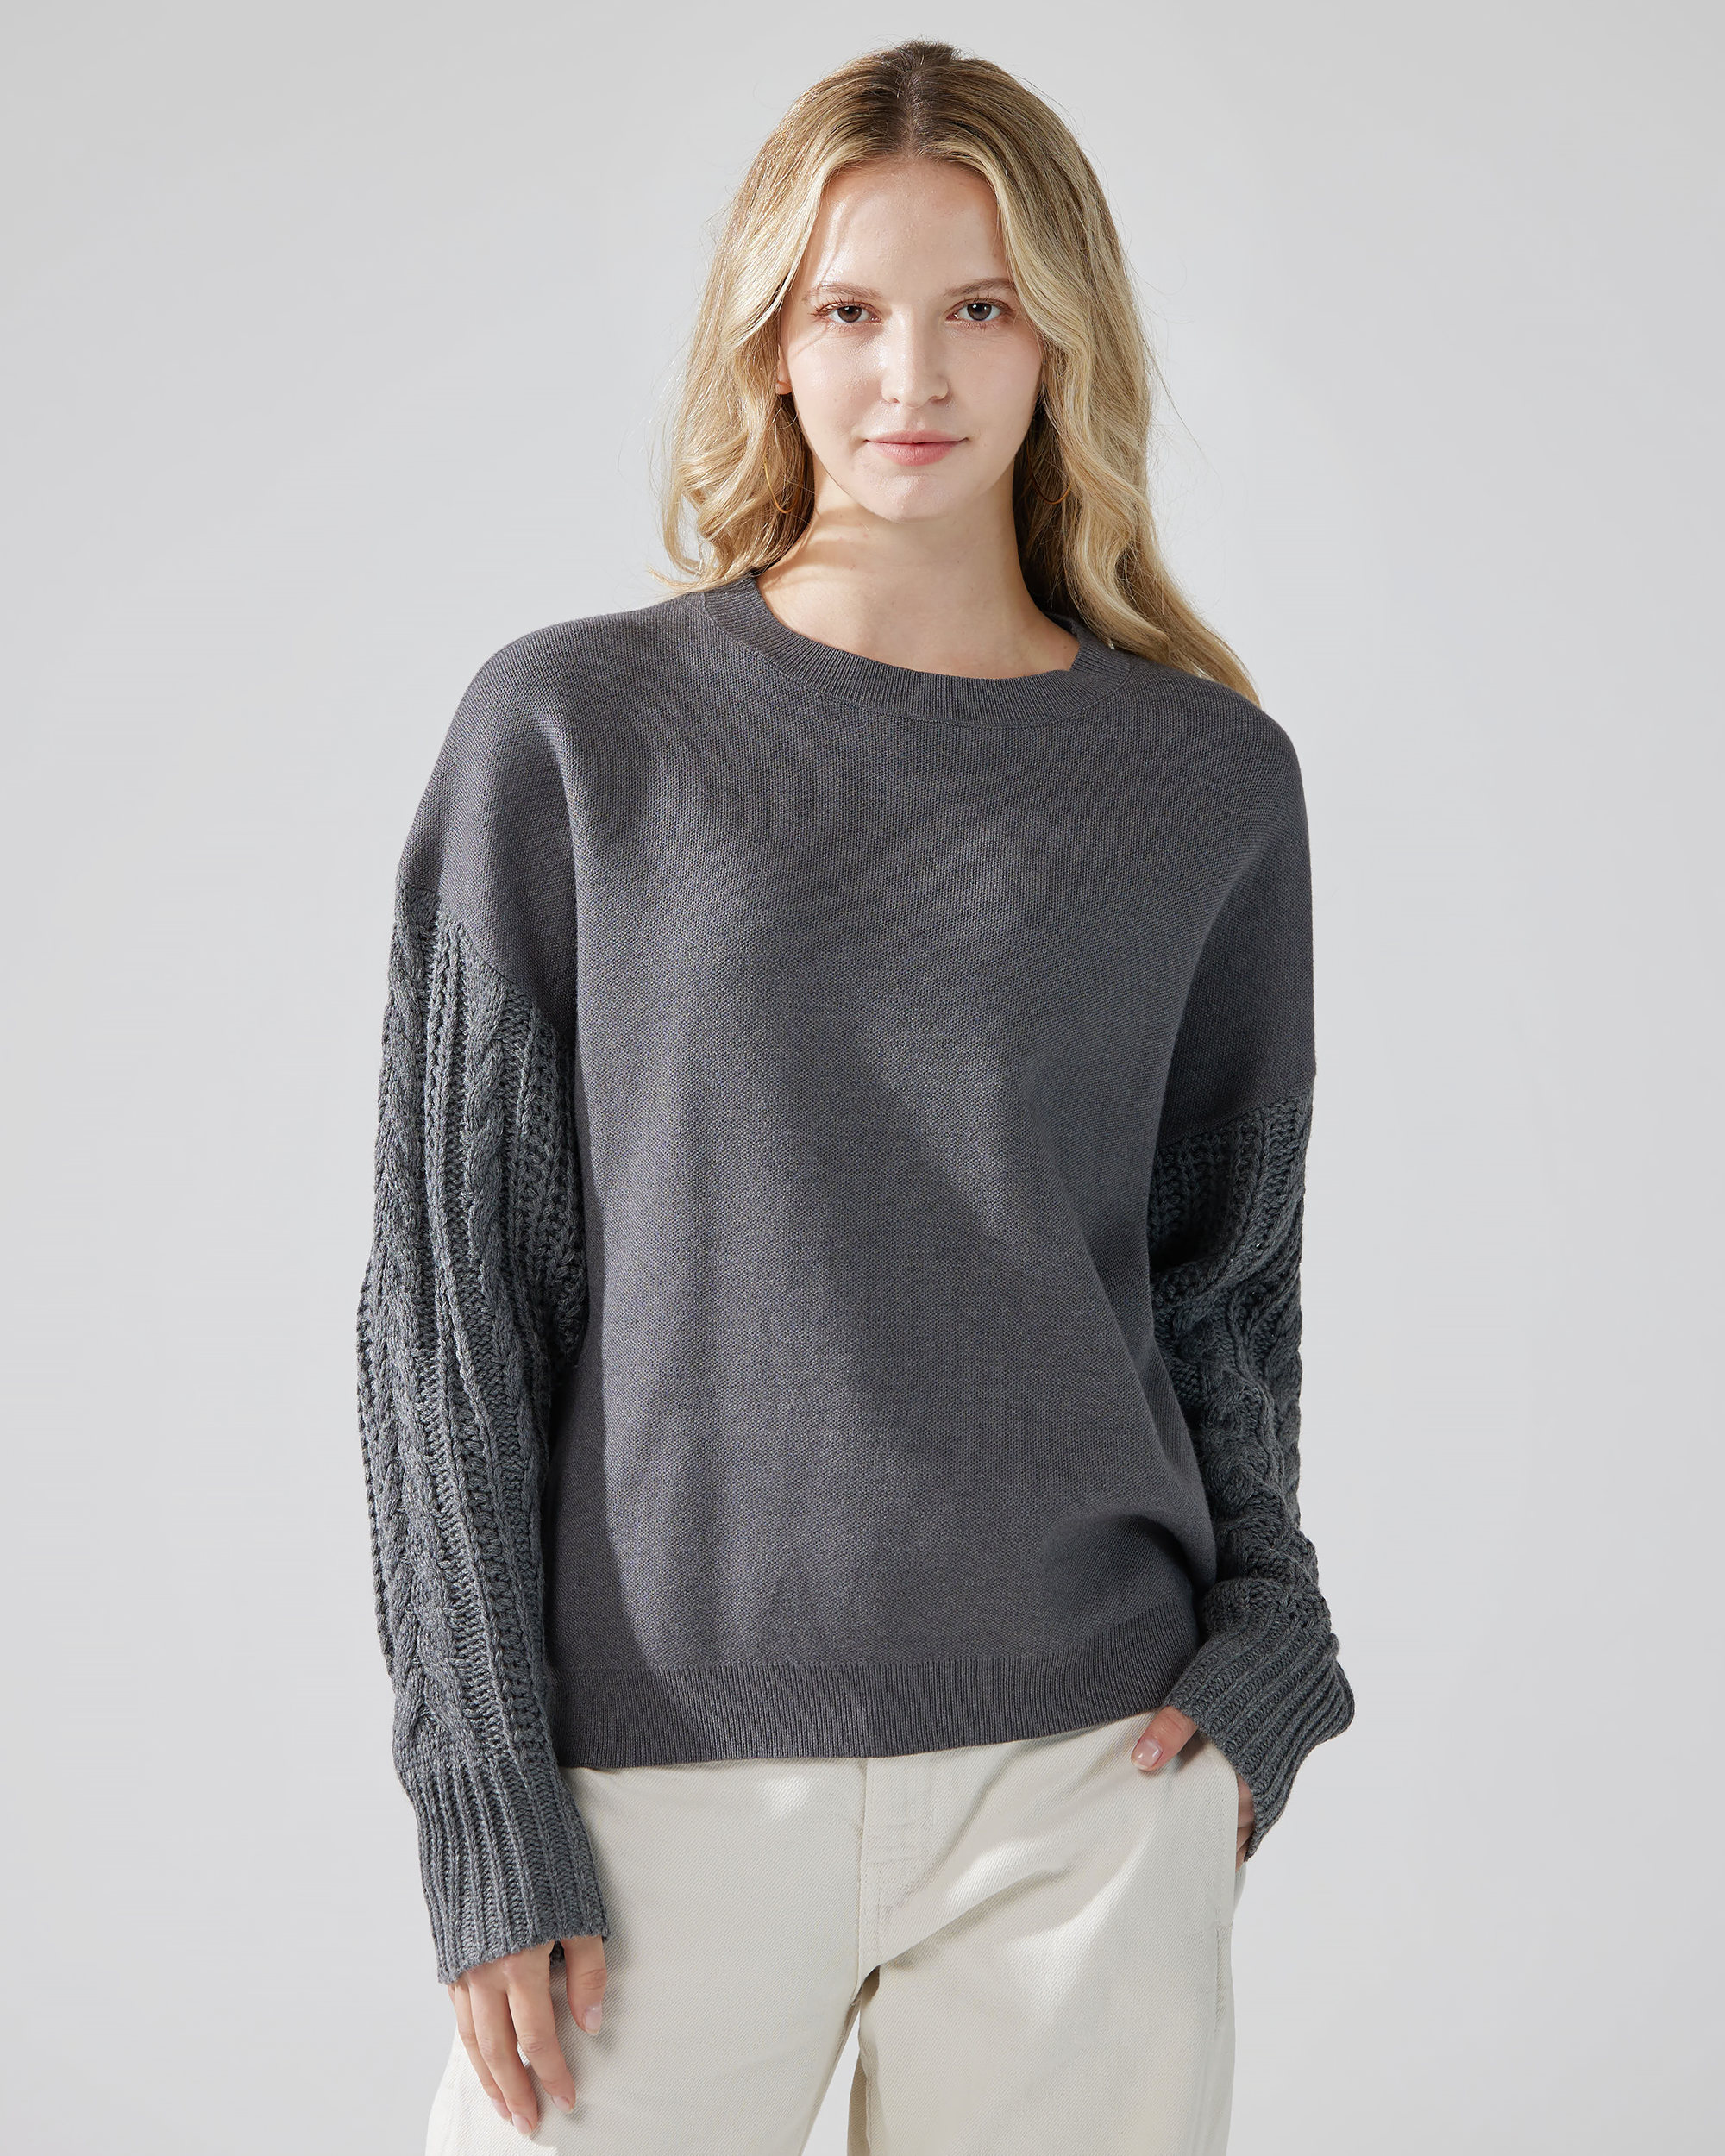 Charcoal Grey Sweater: Cozy Cable Knit